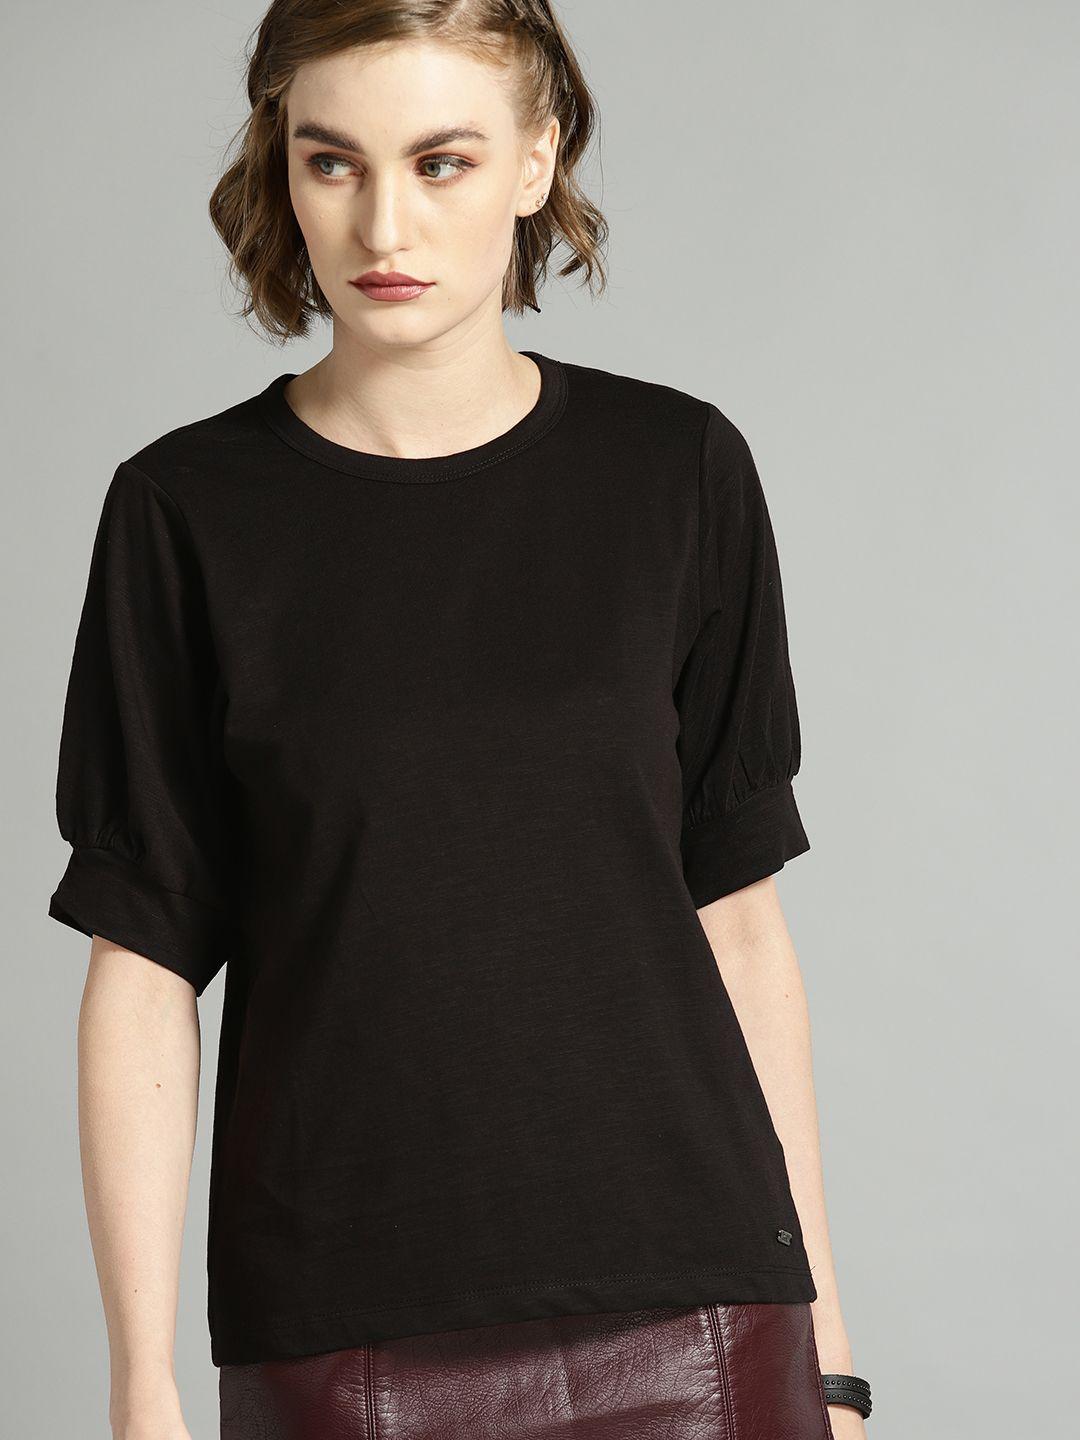 the roadster lifestyle co women black solid round neck t-shirt